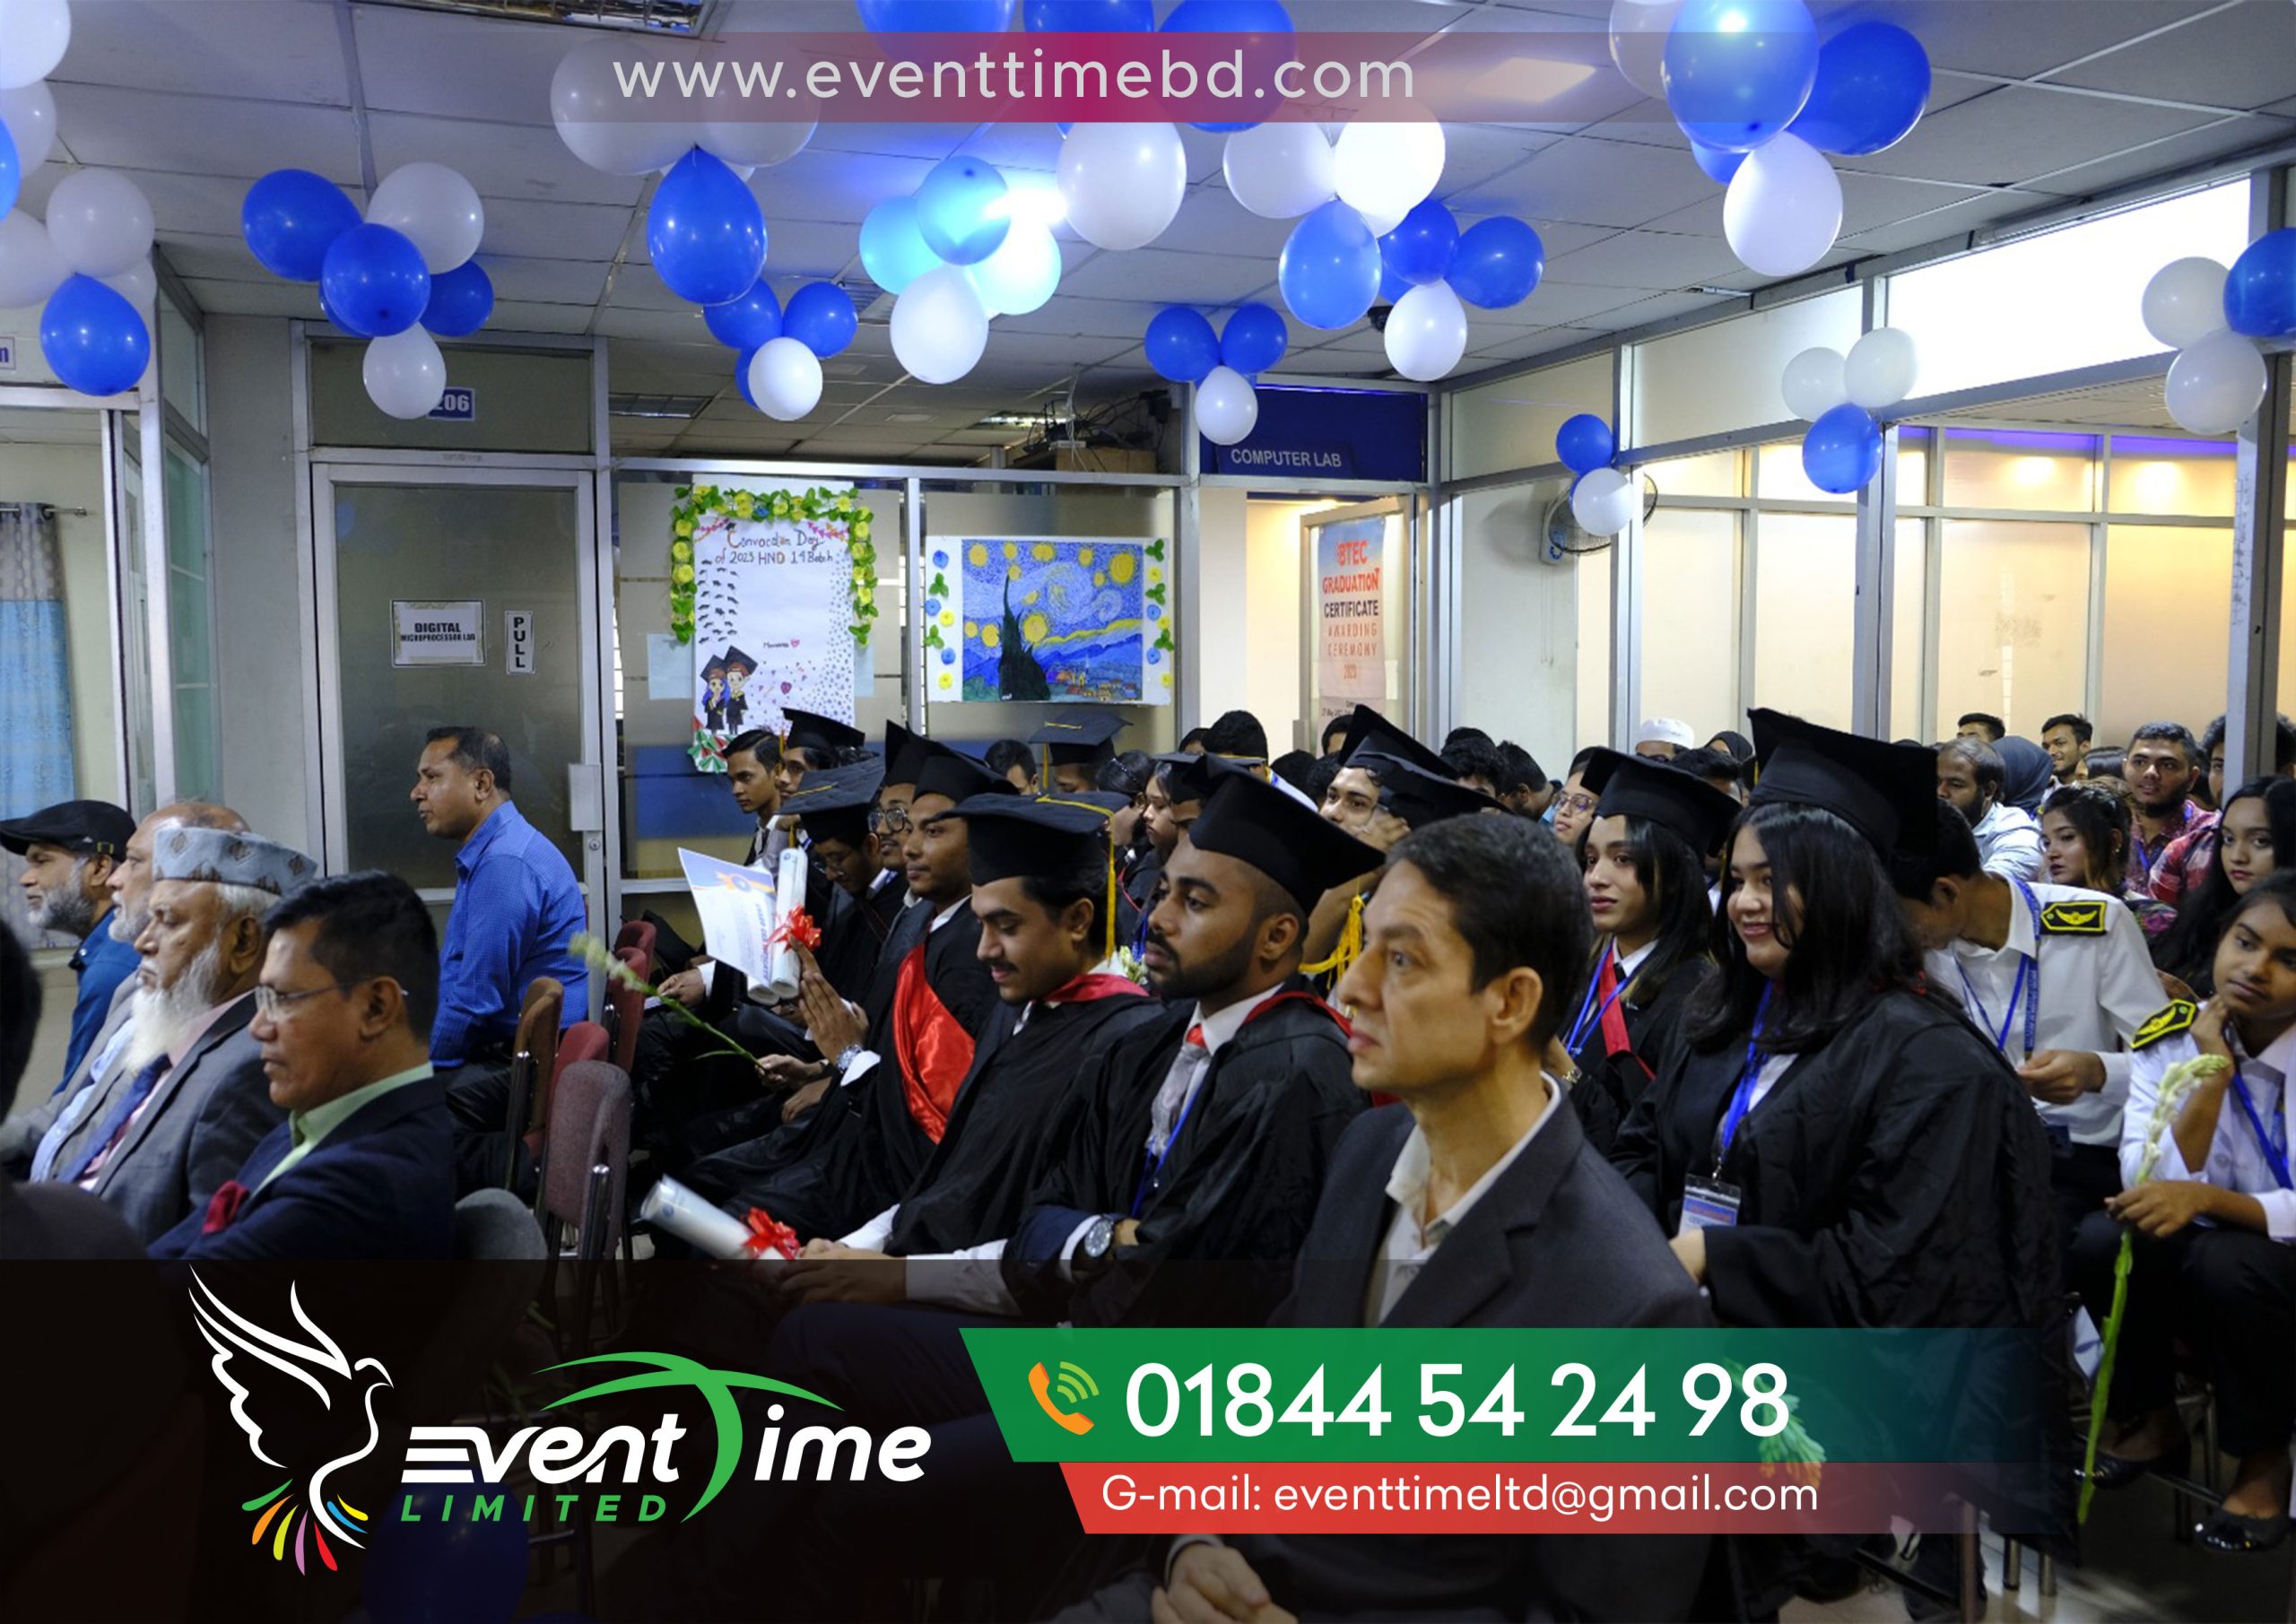 Graduation event. Event company names. Event company. Event company logo. Event company Bangladesh. Event company near me. Event company malaysia. Event company in delhi. Event company in mumbai. Event company profile. Event company in dubai. Are event company. Name for event companies. Which company event. What is event.Which. What is event based. Why event company. Why attend industry events. What caused the event. Purpose of corporate events. Event companies canada. Name for event companies. Event companies for hire. Event company for. Name for event companies. Company event ideas. Company events for employees. How much do event companies make. Event company is. Name for event companies. What makes an event an event. Event vs events. What is an event business. Event companies near me. Event companies near me hiring. Event companies toronto. Event company to. Name for event companies. How much do event companies make. Event industry networking events. What makes an event an event. Event entertainment companies. Event company. Event company names. Event companies near me. Event company singapore. Event companies in dubai. Event companies in mumbai. Event companies in delhi. Event company malaysia. Event company logo. Event company profile. Event company organizational chart. Event company organisation. Event organizer company profile pdf. Event organizer company names. Event organizer company philippines. Event organizer company profile. Event organizer company profile sample. Name for event companies. Event company description. Event company names list. Best event company in india. Best event company in delhi. Best event company names. Best event company. Best event company in mumbai. Best event company in jaipur. Best event company in patna. Best event company in dubai. Best event company in bangalore. Best event company in singapore. Top event companies in canada. Best event management companies in canada. How to run an events company. Company event ideas. Best event company in india. Best event company in delhi. Best event company in jaipur. Best event company in patna. Best event company in mumbai. Best event company in dubai. Best event company in udaipur. Best event company in the world. Best event company in ahmedabad. Best event company in lucknow. Best event company in india. Best event company in delhi. Best event company in jaipur. Best event company in patna. Best event company in mumbai. Best event company in dubai. Best event company in udaipur. Best event company in the world. Best event company in ahmedabad. Best event company in lucknow. Best event company near me. Best event management near me. Best event management company near me. Best party rental company near me. Corporate event companies near me. Corporate event ideas near me. Corporate events near me. Large event planning companies. Best event management tools. Best event company in india. Best event company in delhi. Best event company in jaipur. Best event company in patna. Best event company in mumbai. Best event company in dubai. Best event company in udaipur. Best event company in the world. Best event company in ahmedabad. Best event company in india. Best event company in delhi. Best event company in jaipur. Best event company in patna. Best event company in mumbai. Best event company in dubai. Best event company in udaipur. Best event company in the world. Best event company in ahmedabad. Best event company in lucknow. Best event company in india. Best event company names. Best event company in delhi. Best event company. Best event company in jaipur. Best event company in patna. Best event company in mumbai. Best event company in dubai. Best event company in udaipur. Best event company in ahmedabad. Best event organizer company. Best corporate event organisers in chennai. Best corporate event organizers. Top event organizing company. Best corporate event organizers in chennai. Best corporate event organisers in mumbai. Best corporate event organisers. Best event management in odisha. Name suggestions for an event company. World best event management company. Event agency. Event agency jobs. Event agency dubai. Event agency near me. Event agency jobs london. Event agency malaysia. Event agency singapore. Event agency in mumbai. Event agency sydney. Event agency toronto. Are event planner. Are event company. What is an event agency. Can event planning be a side job. Can event planning be a career. What is an event agency. How to get into the event planning industry. What's event management. What event management do. What's event planning. What is event agency. What caused the event. What is an events company. What are agency problems and how do they come about. Which. Which company event. First agency events. Who event management system. Who event planning. What is an event agency. Why hire an event management company. Who sponsors events. Who owns main event entertainment. Who were involved in the event. Why event management is important. Why event management. Why event management interview questions. Why event planning. Why event management as a career. Why event planner. Why event management course. Why event management system. Why event management companies. Why event company. Event agency cannes. Event management canada. Event planner canada. Event planner cancellation policy. Event management canberra. Event planner canberra. Event planning canvas. Event planning canada. Event planner canada salary. Event planner cancun. Event agency forum. Event planner for birthday party. Event management for birthday party. Event planning form. Event management for marriage. Event planner for baby shower. Event planning for wedding. Event planner for birthday. Event planning for birthday. Event planning for companies. Event management is considered one of the strategic. Event management is good career. Event management is. Event management is in which industry. Event planner is. Event planning is. Event company is. Event management is important. What is an event agency. Event agency near me. Event planner near me. Event management near me. Event planning near me. Entertainment agency near me. Event planner near me jobs. Event planner near. Event planner near me indian. Event management near vijayawada. Event management near ramamurthy nagar. Event agency toronto. Event agency tokyo. Event management tools. Event planner toronto. Event management tourism. Event management top companies. Event planning toronto jobs. Event planner toronto salary. Event planning to. Event management to. Event management with salesforce. Event planner with. Event planning with. Event management with meaning. Event planning with meaning. Event management with course. Event agency in dubai. Event agency in london. Event in agency. Event agency jobs. Event management without degree. Event planner without degree. Event planning without degree. No event information. Event agency. Event agency jobs. Event agency dubai. Event agency london. Event agency staff. Event agency staffing. Event agency recruitment. Event management. Event planner. Event management course. Event management organizational chart. Event organizer company. Event organizer company profile pdf. Event organizer company profile. What is an event agency. Event planner vs coordinator. Event planner vs project manager. Event management vs interior design. Event planning vs coordination. Event planner vs manager. Event planning vs marketing. Event management vs monitoring. Event management vs marketing. Event planner vs promoter. Event planning vs. Commencement. Convocation ceremonies. Graduation ceremony. Convocation photoshoot. Graduation days. Graduation party. Convocation day. Commencement day. Graduation convocation. Jk graduation. Commencement ceremony. Graduation ceremony 2022. Graduation open house. Graduation event. Graduation party invitations. Moving up ceremony. Preschool graduation. Baccalaureate service. Pre k graduation. Grad party. Lavender graduation. Graduation ceremony invitation. Graduation dinner. Degree convocation. Graduation day 2022. Graduation stage decoration. Nursery graduation. Baccalaureate graduation. Graduation kindergarten. Masters in event management. Graduation open house invitations. Grad party invitations. Graduation dinner invitation. University commencement. 2022 commencement. Graduation celebration invitation. Grad day. Graduation reception. Graduation party theme. Virtual graduation ceremony. Senior party. Graduation invitation examples. Phd convocation. Graduation day invitation. University graduation ceremony. Graduation day decoration. Graduation day celebration. December graduation. Graduation week. Convocation invitation. Commencement graduation. Graduation sunday. Vpk graduation. Commencement ceremony 2022. Graduation catering. Phd graduation ceremony. Undergraduate commencement. Graduation banquet. Graduation day ceremony. The graduation ceremony. Graduation party at home. Graduation parade. Graduation commencement ceremony. Graduation lunch. Grad dinner. Phd party. Graduation party invitations online. Graduation and convocation. Attend graduation ceremony. 2022 graduation ceremony. Graduation gala. Graduation party announcement. Invitation for convocation ceremony. Event management mba. Kindergarten graduation day. Kg graduation day. Graduation after party. Graduation day 2023. Friends graduation party. Masters graduation ceremony. Mba graduation ceremony. Graduation day date. On your graduation day. Ca graduation ceremony. Graduation day stage decoration. Convocation stage decoration. Convocation party. Hood ceremony. Graduation december 2022. Kindergarten celebration. Nursing convocation. Student speaker at graduation. Postgraduate graduation ceremony. Kindergarten convocation. A graduation ceremony. Pre kindergarten graduation. Hood convocation. Birthday and graduation party together. Graduation picnic. Graduation day 2021. Graduation tent. December 2022 graduation. Church graduation ceremony. Graduation dinner party. Convocation and graduation. Graduation ceremony today. Graduation day photoshoot. Graduation ceremony 2023. All night grad party. Diploma in event management after graduation. Indoor graduation photoshoot. Day of graduation. Graduation convocation ceremony. Decorating for graduation party. Graduation ceremony announcement. Graduation and birthday party. Graduation birthday party. 2022 graduation party. Graduation tea party. Invitation of graduation ceremony. Master open day. Commencement service. Master degree convocation. Graduation party invitations 2023. Photoshoot convocation. Graduation party game. Virtual commencement. Commencement ceremony invitation. My graduation party. Stage decoration for convocation. University graduation party. Commencement celebration. Balloon decoration for graduation. Graduation ceremony decoration. Donut graduation party. Guest speaker at graduation. Event management masters degree. Graduation 2023 date. Commencement party. Degree party. Graduation breakfast. University graduation day. Graduation invitations 2022. Graduation party invitations 2022. Catering for graduation party. Graduation 2022 date. Graduation brunch. Luau graduation party. Graduation pool party. Backyard graduation party. Taco graduation party. Fiesta graduation party. Graduation party 2022. Outdoor graduation party. Grad party catering. Phd day 2022. Free graduation party invitations. Graduation brunch invitations. Kindy graduation. Graduation and birthday party invitation. Graduation party on a budget. Cheap graduation party invitations. Commencement website. Phd open days. Commencement ball. Graduation reception invitation. Formal invitation graduation. Graduation party agenda. Reception graduation. Graduation cookout invitations. Grad party theme. Surprise graduation party invitations. University commencement ceremony. Graduation week 2022. Kindergarten ceremony. Grad commencement. Make your own graduation party invitations. Hosting a graduation party. Mba in event management fees. Top universities for masters in event management. Same day graduation invitations. Graduation commencement invitations. Graduation day theme. Graduation lunch invitation. Grad convocation. Graduation online invitations. Customized graduation party invitations. Graduation car parade. Hawaiian themed graduation party. Graduation garden party. Nursing pinning ceremony invitations. Commencement hood. Bbq graduation party. Adult graduation party. Pizza graduation party. Graduation scavenger hunt. A graduation party. Graduation day events. Event management master degree. Graduation announcement no party. Pre k graduation party. Baseball themed graduation party.